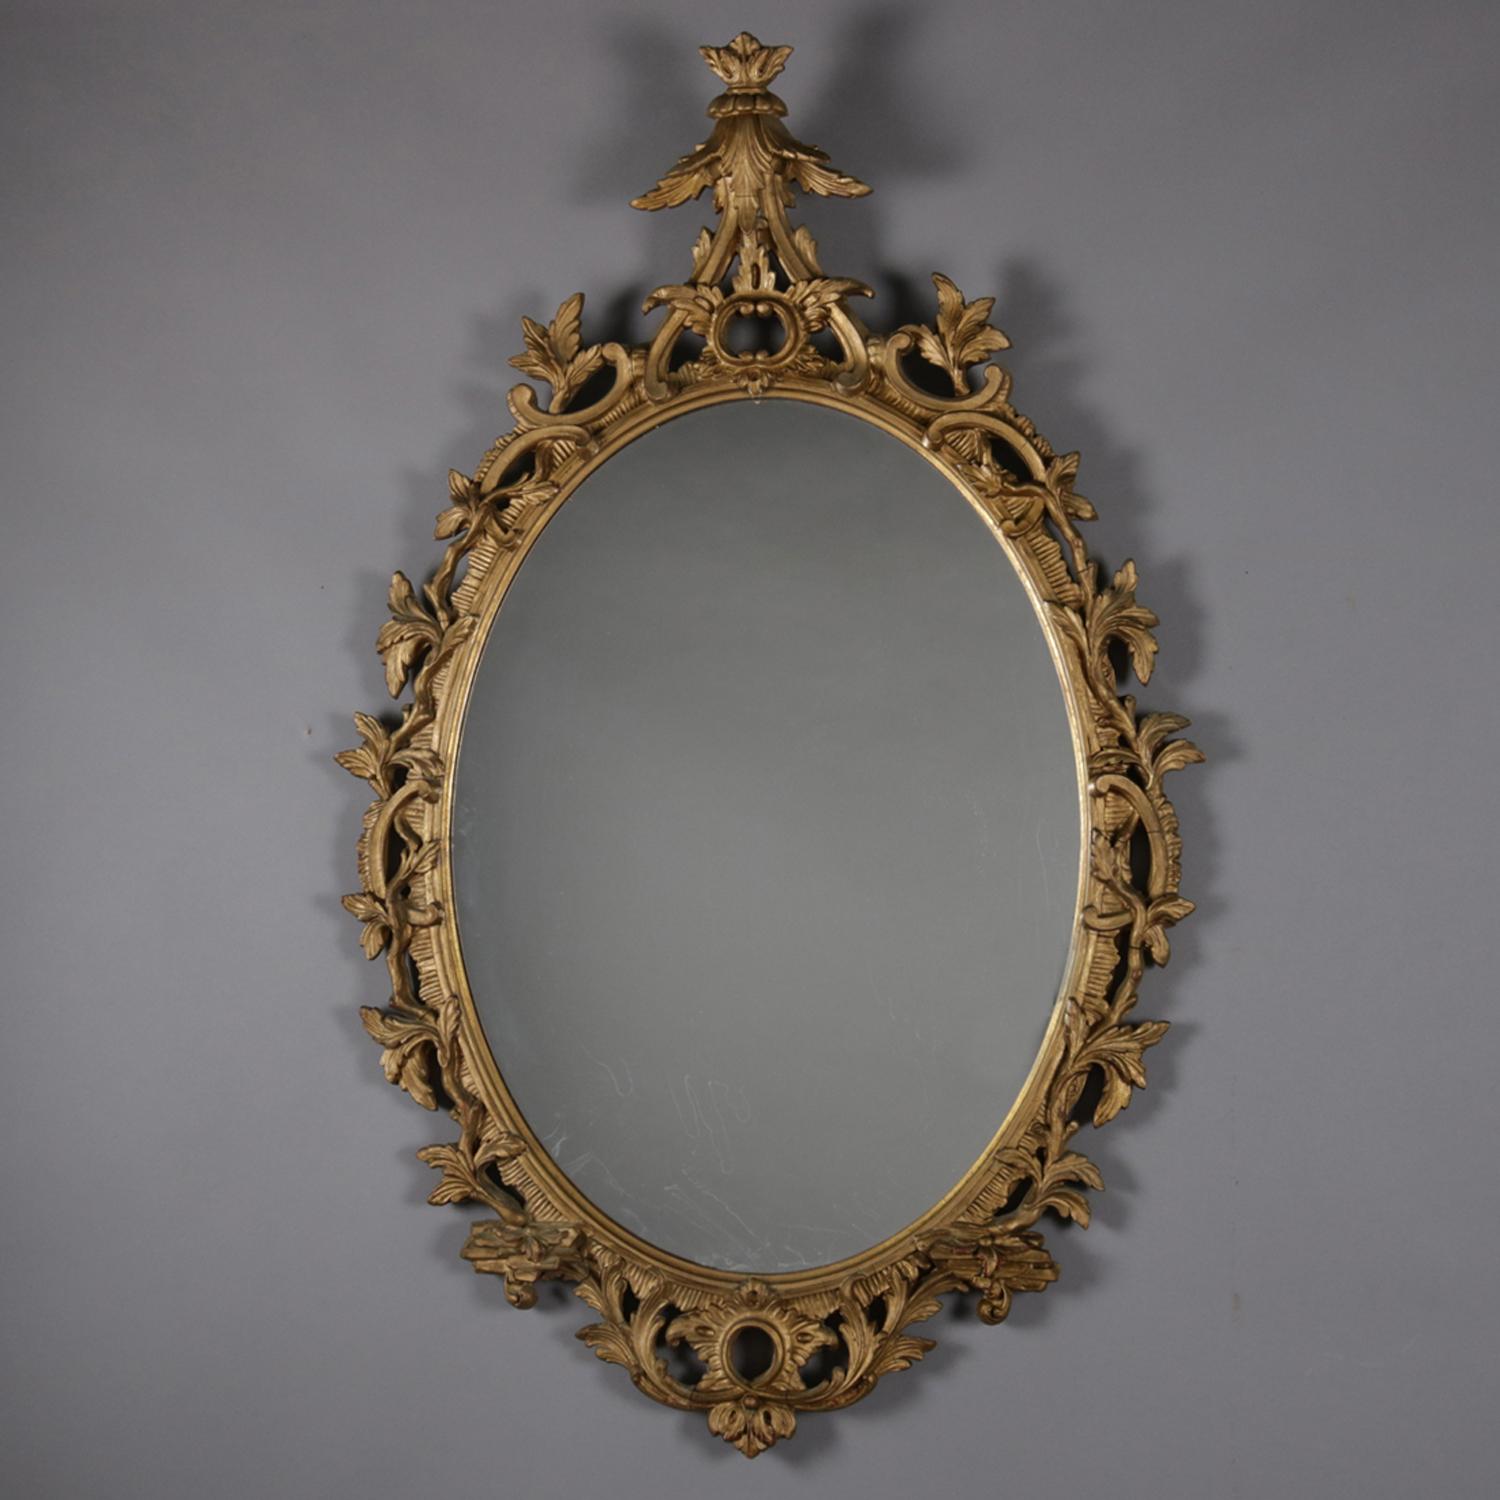 Antique Italian Baroque carved wall mirror features pierced foliate giltwood surround with fleur de lis crest, 19th century.

Measures - 48